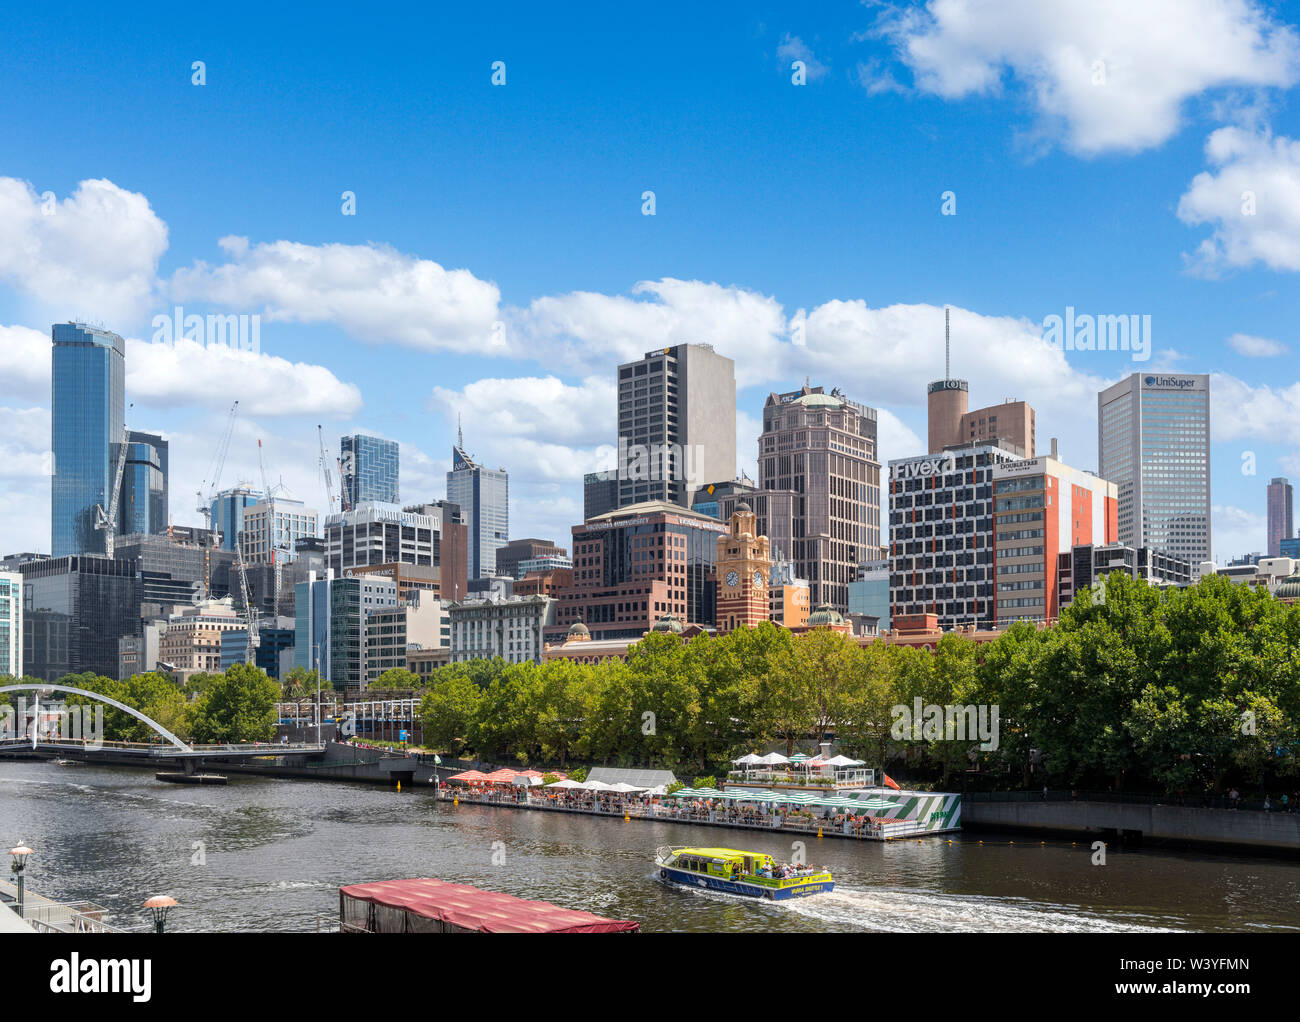 Yarra River and Central Business District (CBD) viewed from Southbank, Melbourne, Victoria, Australia Stock Photo